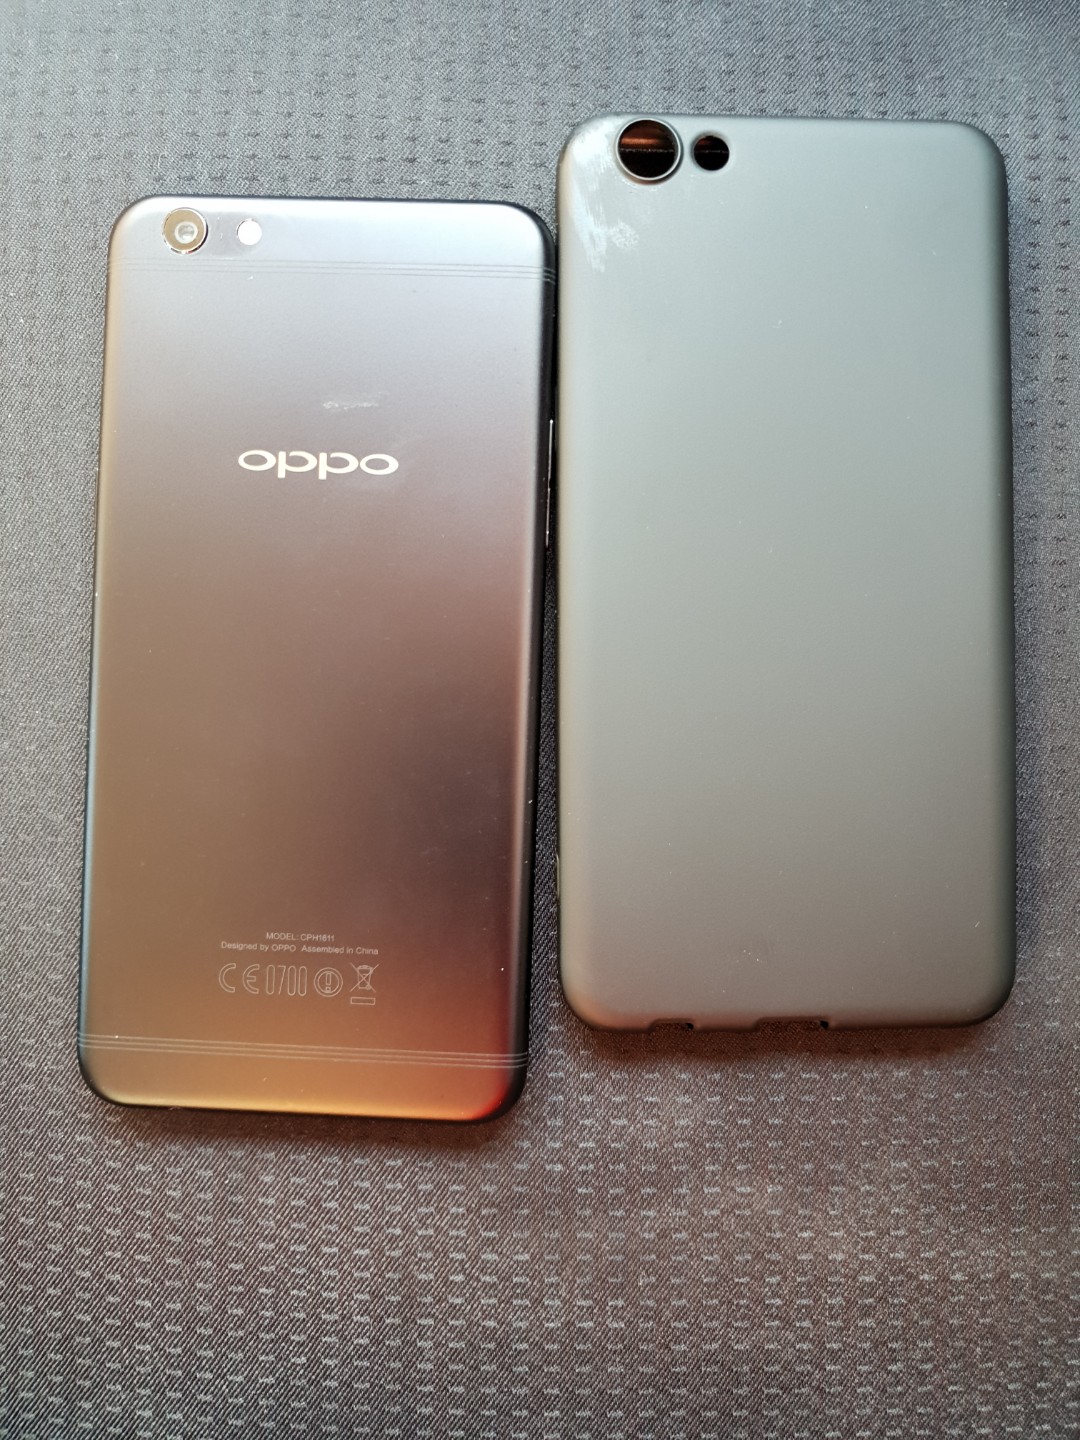 Oppo R9 and R9 Plus review: Strengthen your selfie game: Oppo's R9 and R9 Plus phones boast 16 ...